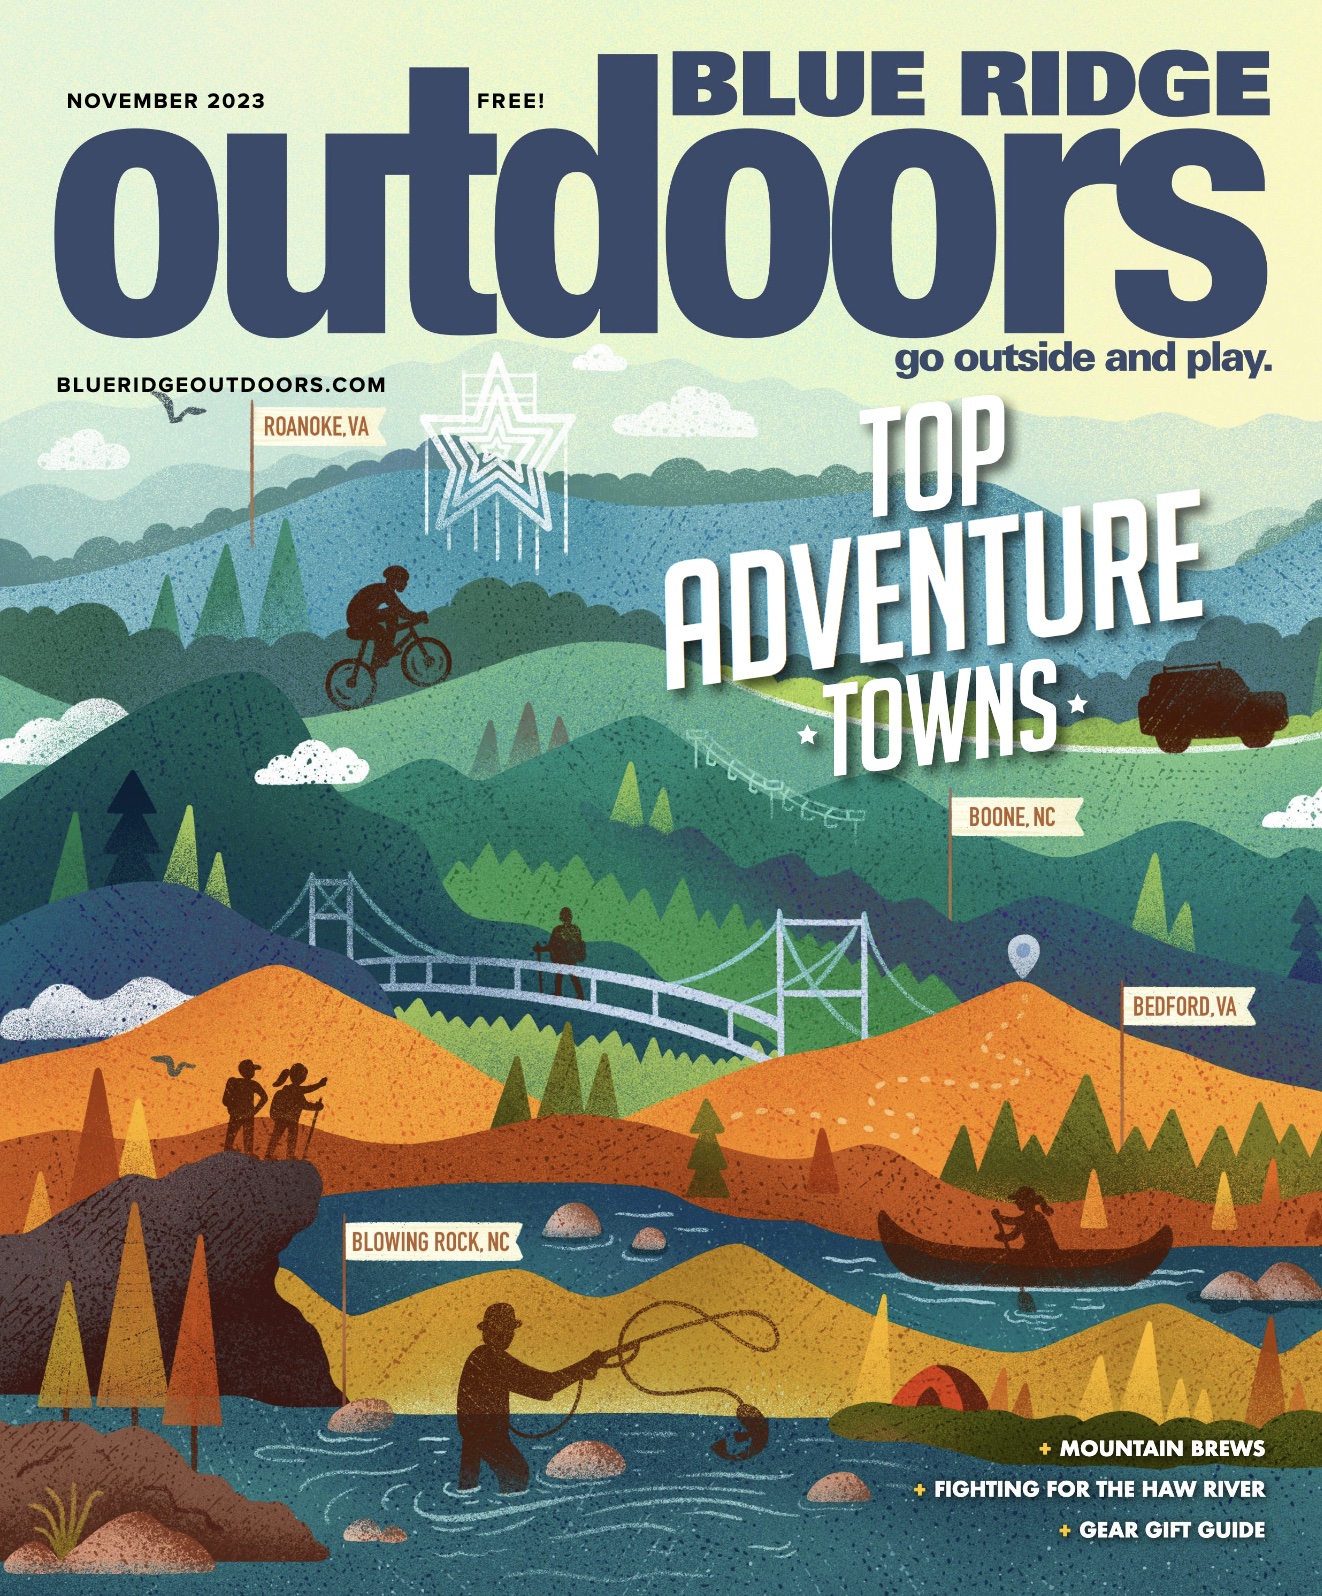 Outdoor Guide Magazine September-October 2018 by